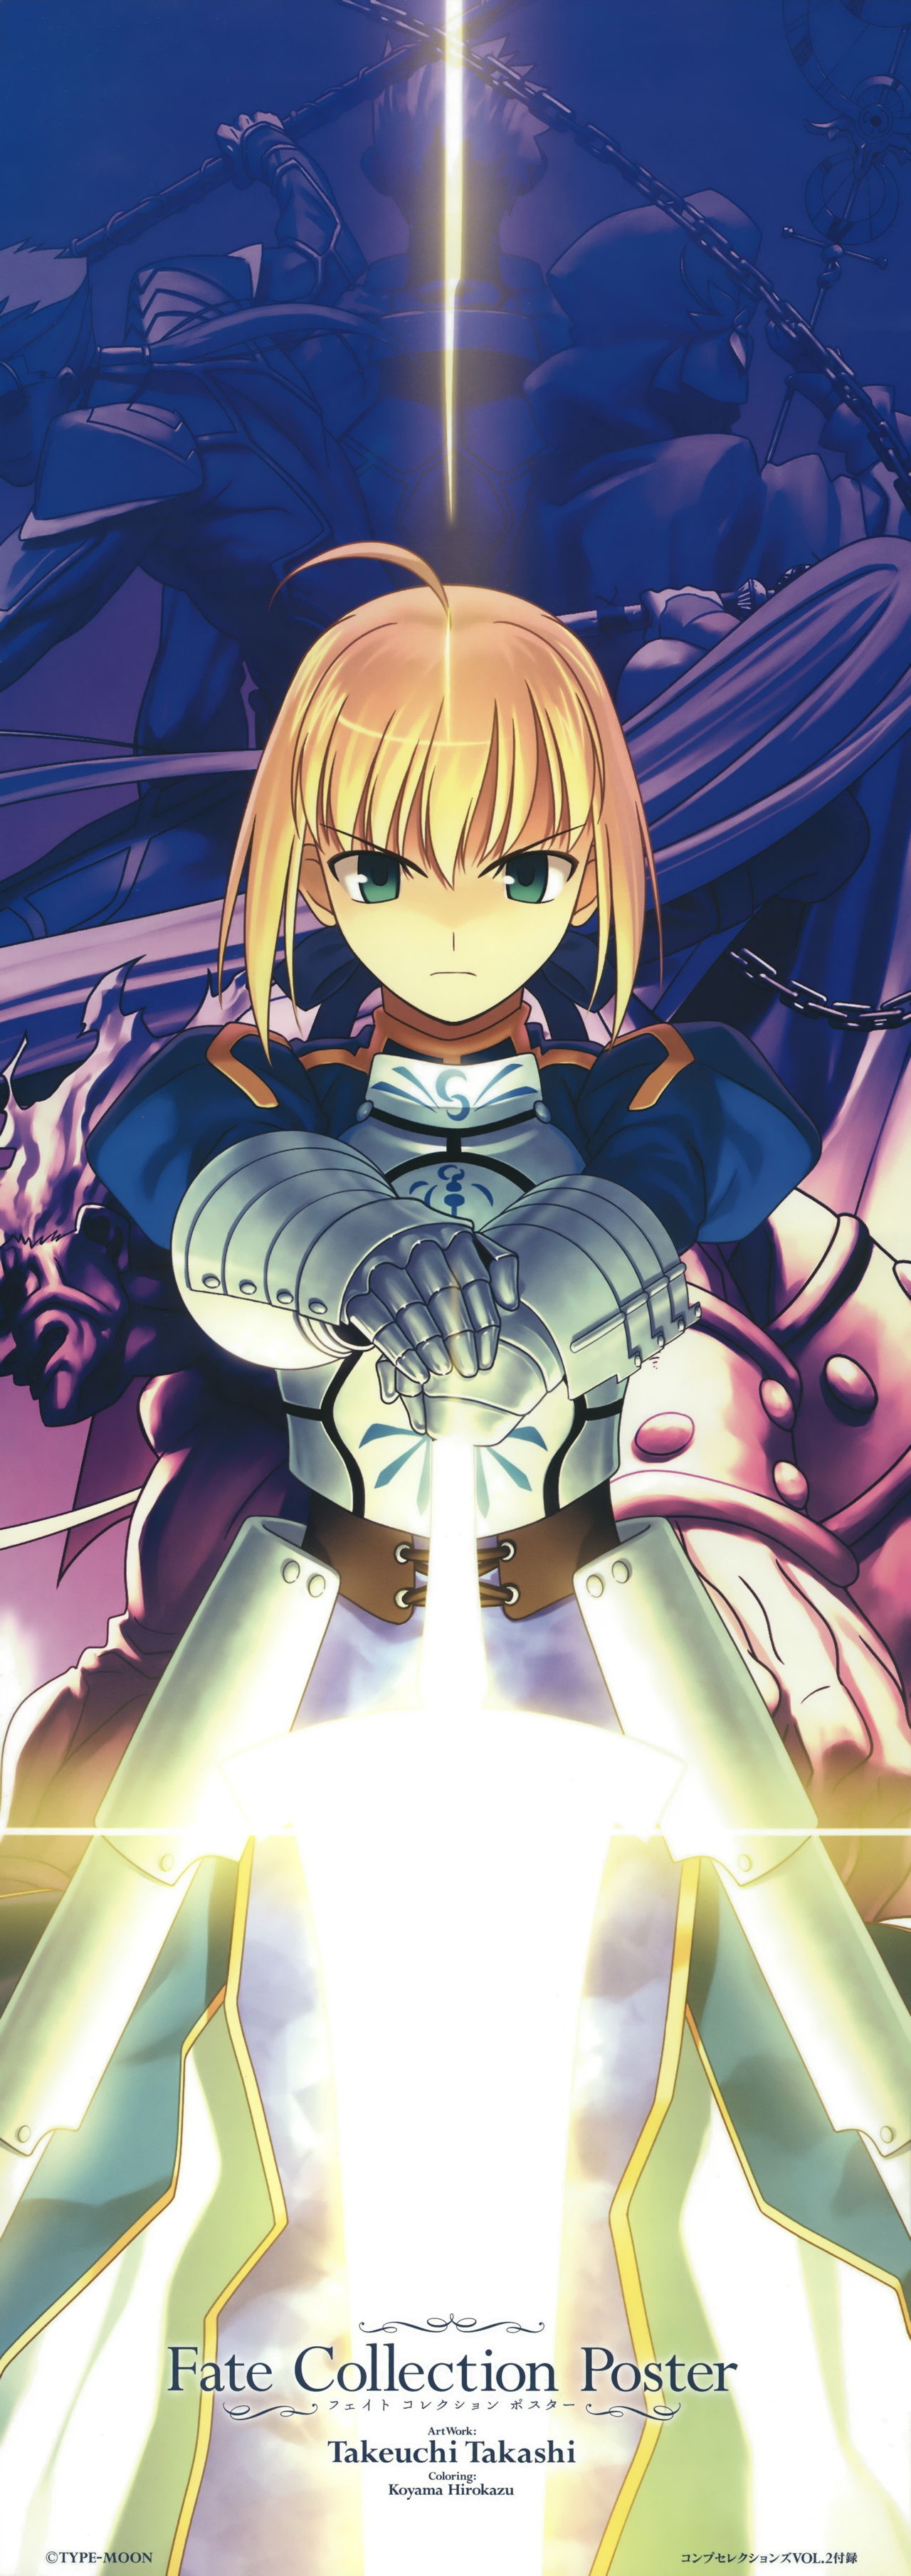 Fate Collection Poster 11